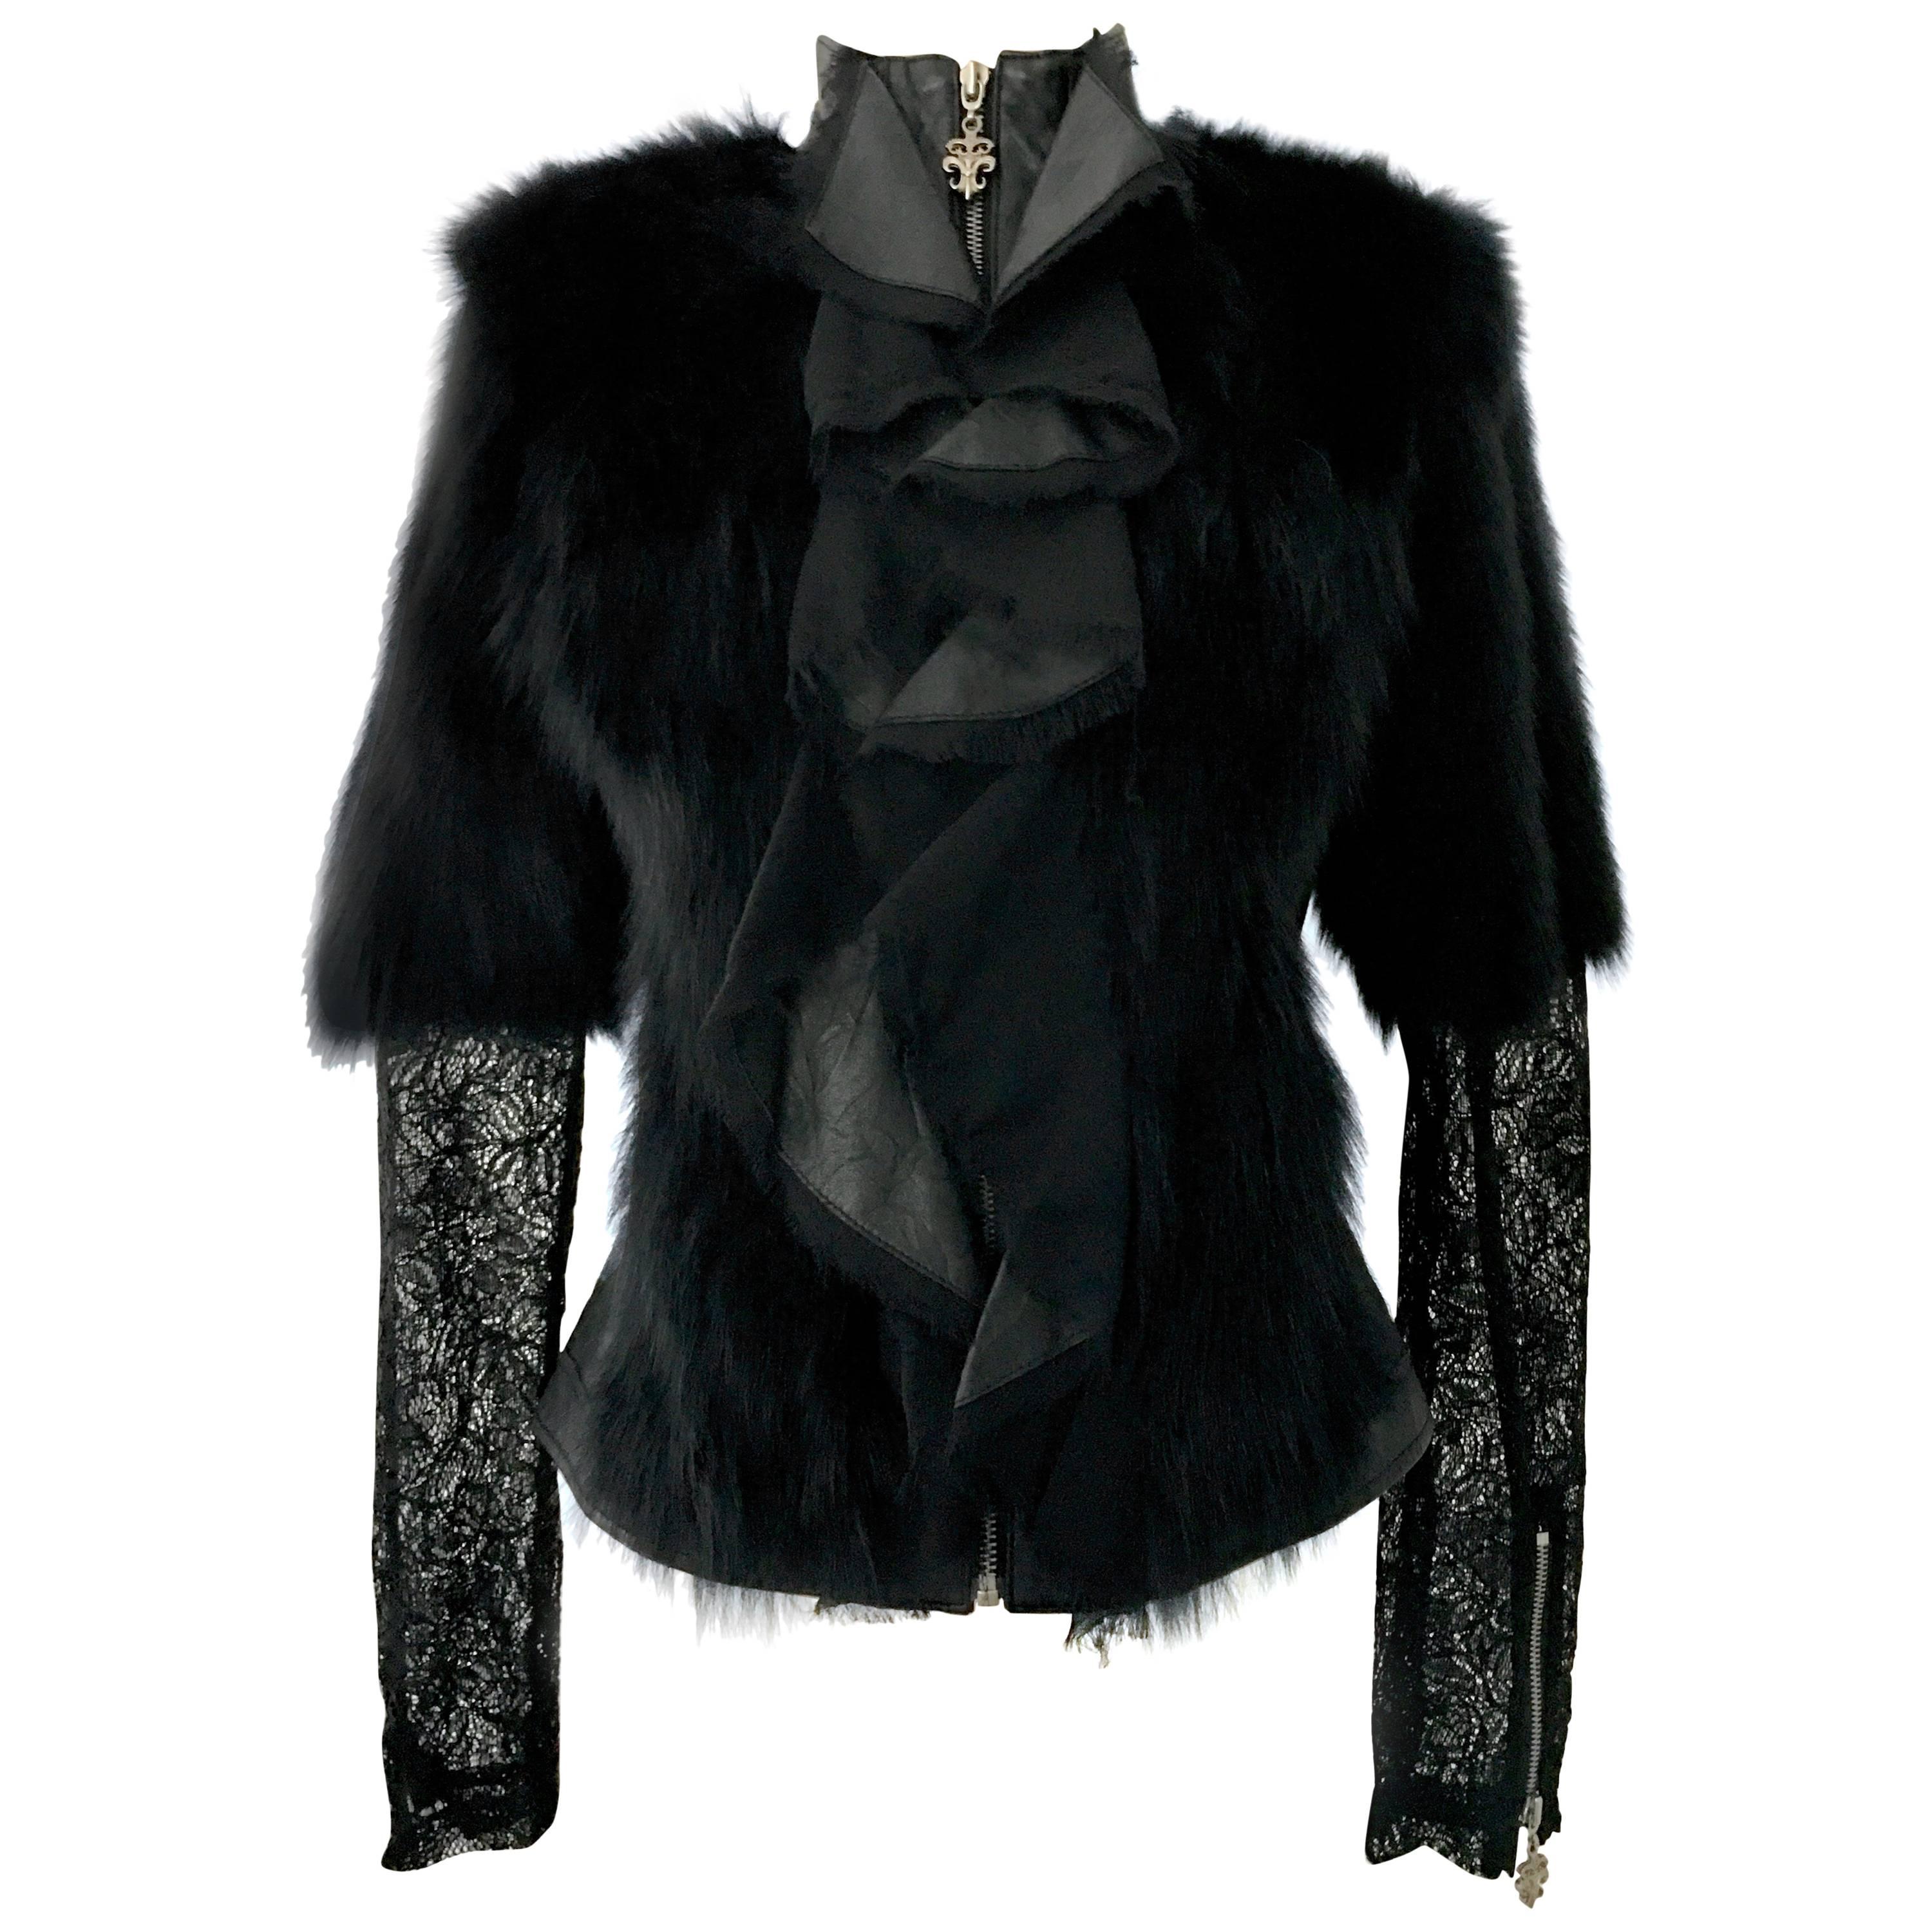 21st Century & New Black Leather, Fox Fur & Lace shirt/jacket by, Royal Underground - Nikki Six & Kelley Gray. Features a fitted zipper front bodice in black soft leather with black fox fur trim and black lace panels and sleeves. Leather and silk